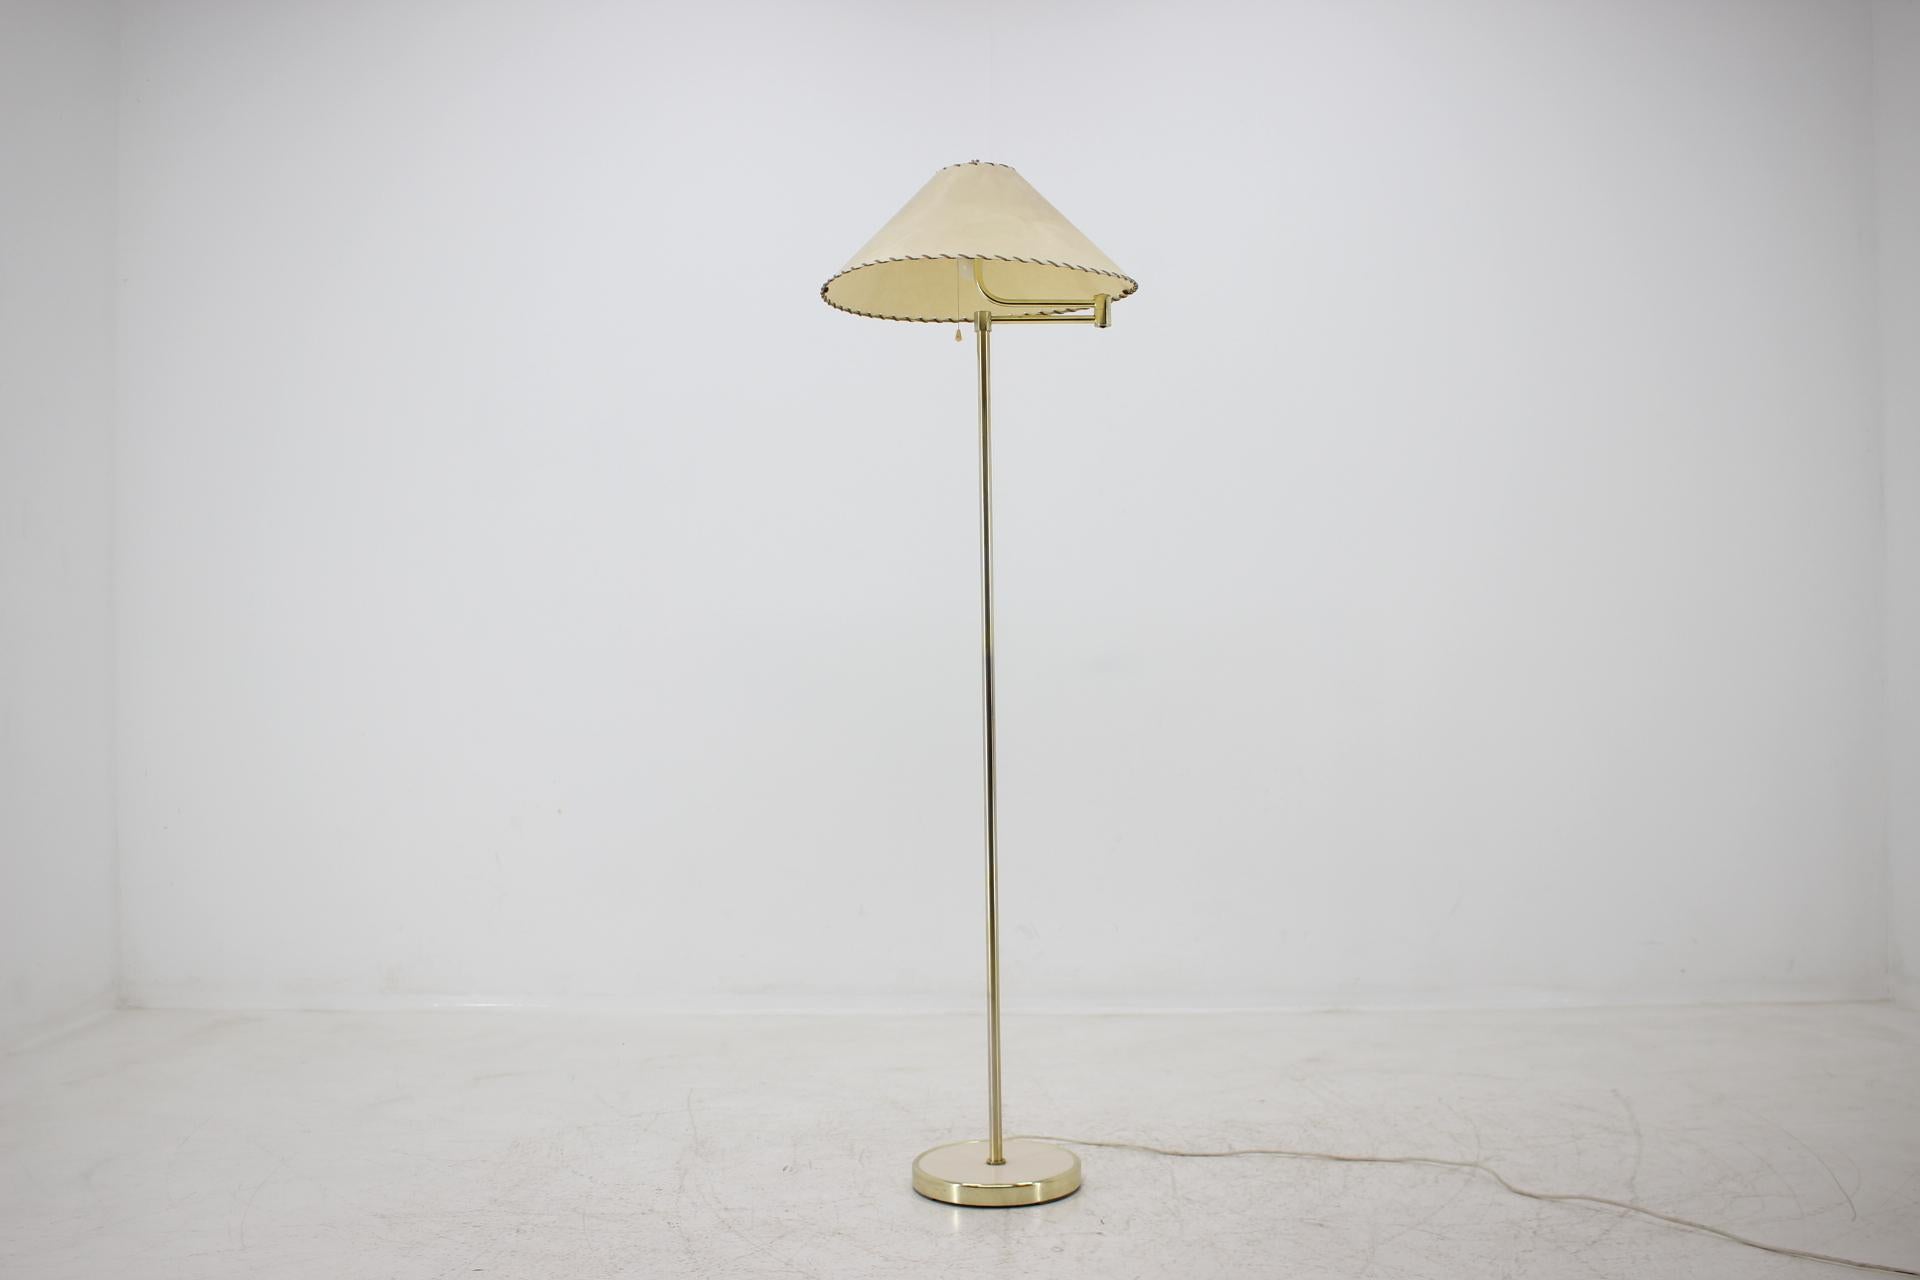 - Made in Germany
- Made of brass, plastic, fabric
- Re-polished
- Adjustable lamp shade
- Fully funktional
- Good, original condition.